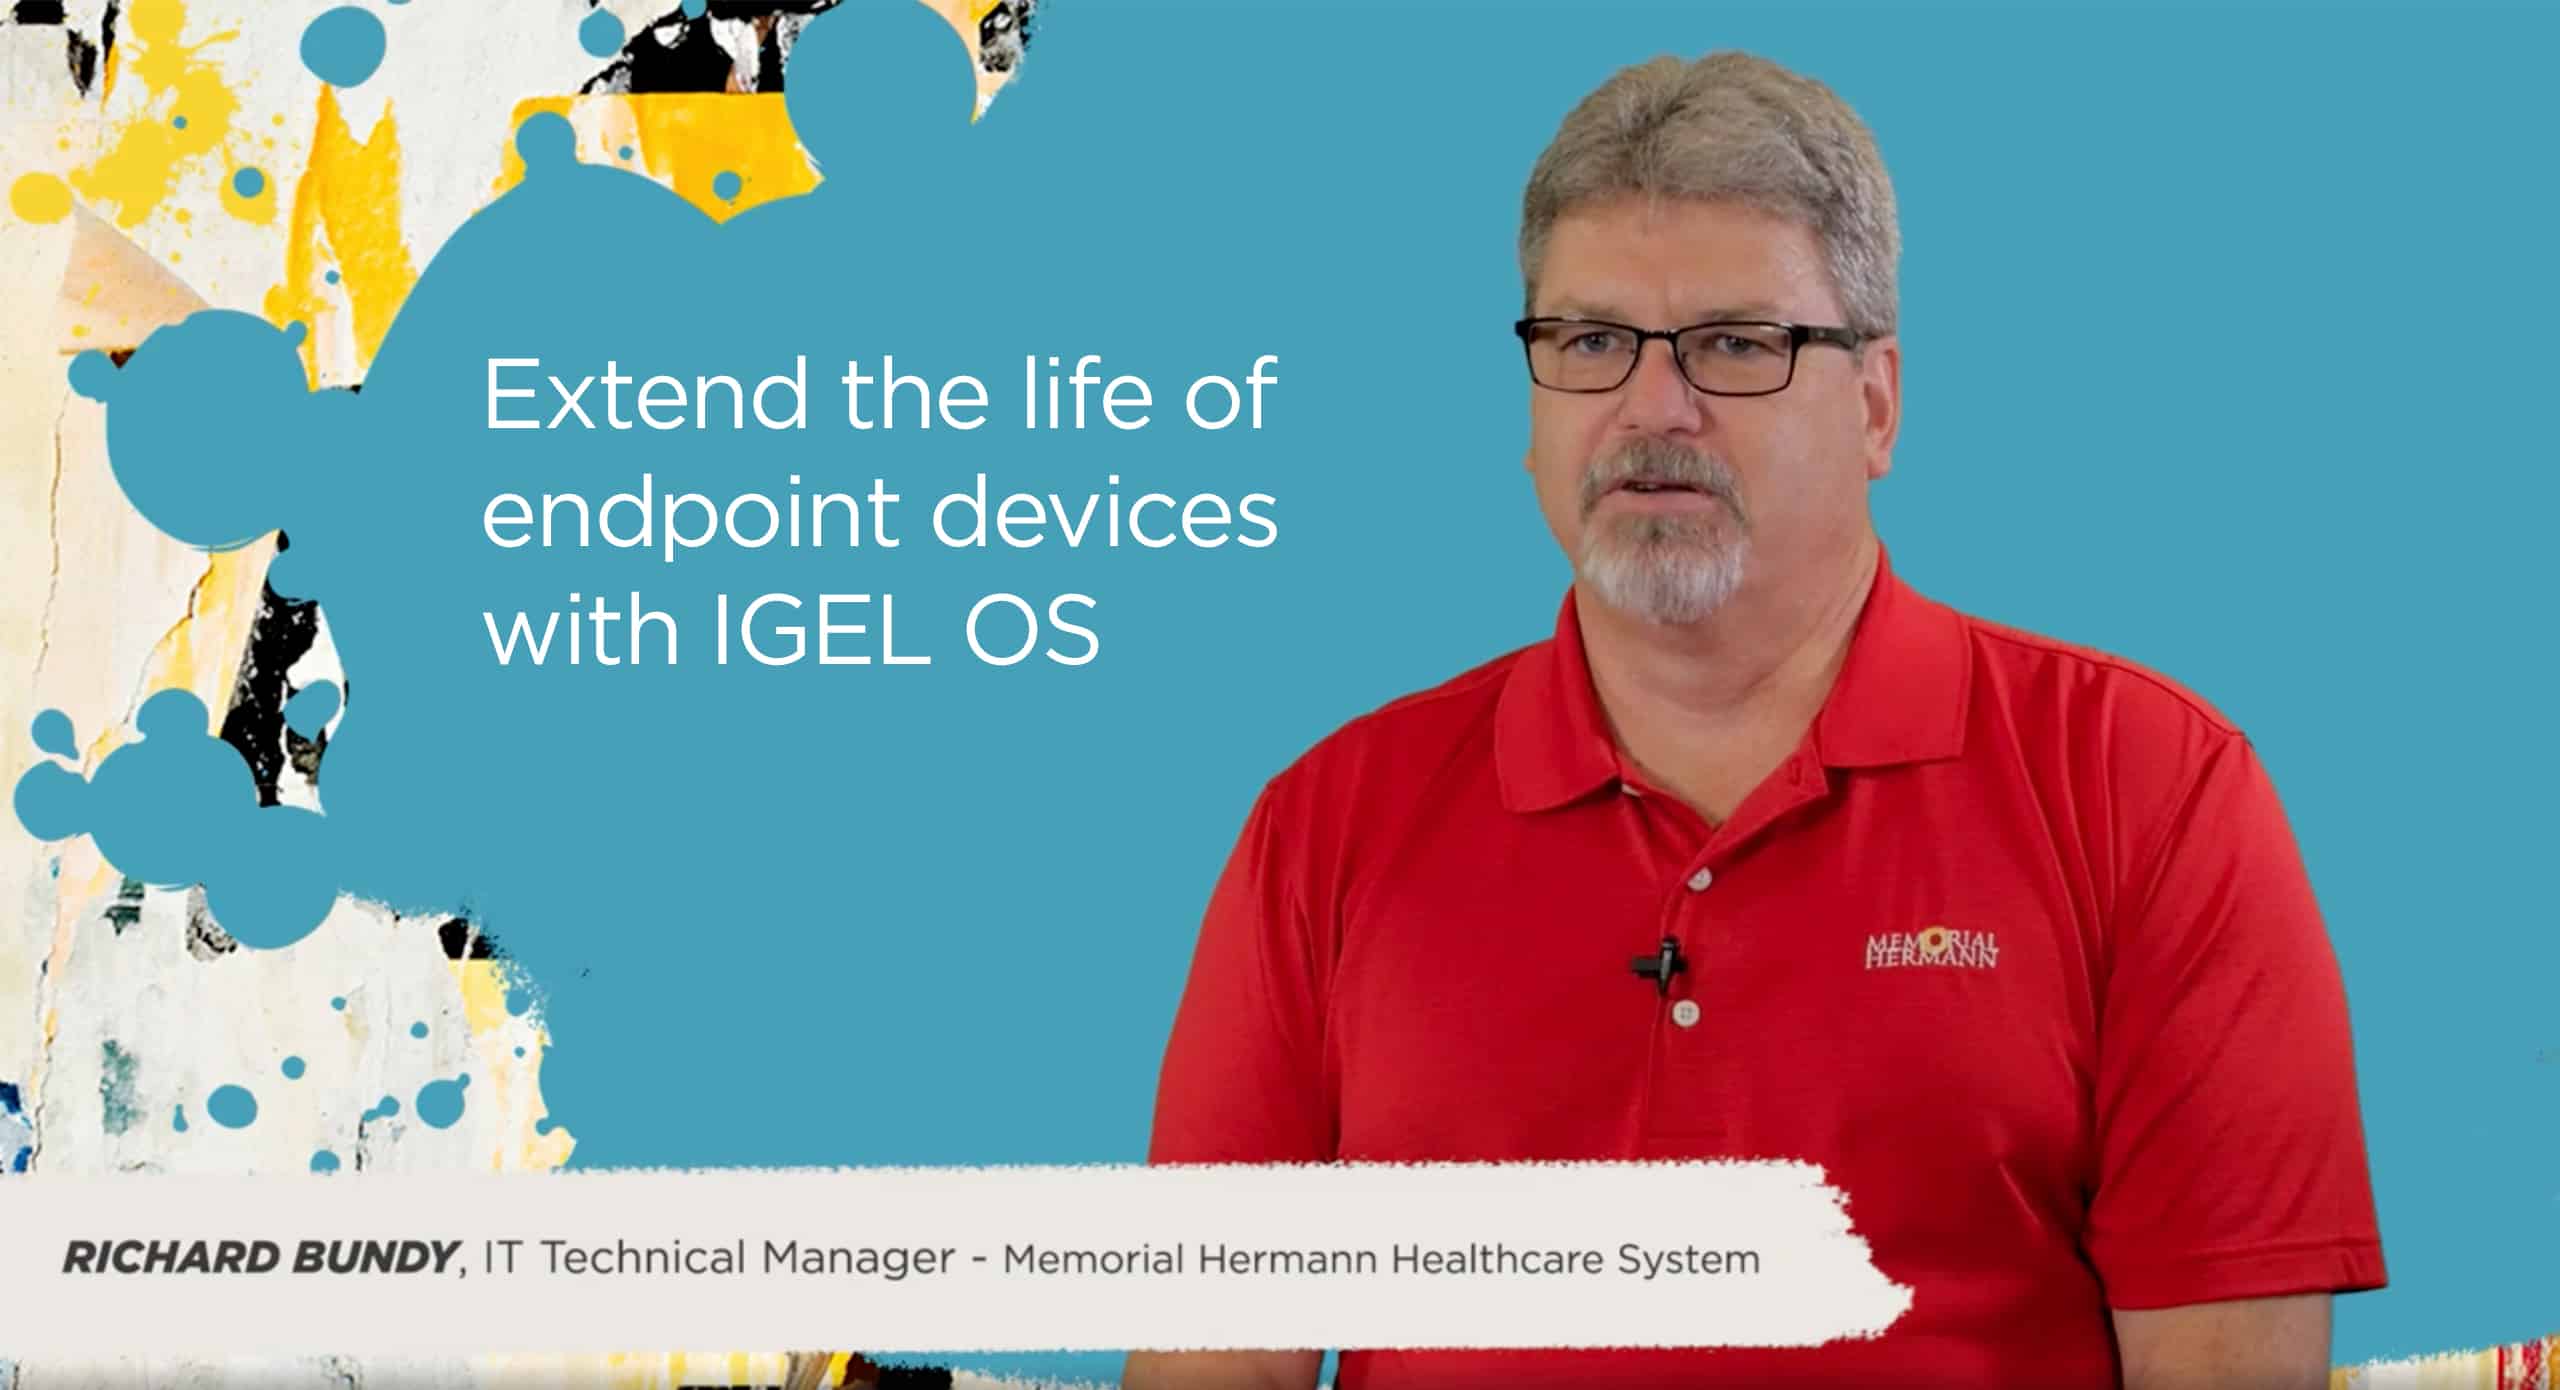 Extend the life of endpoint devices with IGEL OS (Richard Bundy, Memorial Hermann)